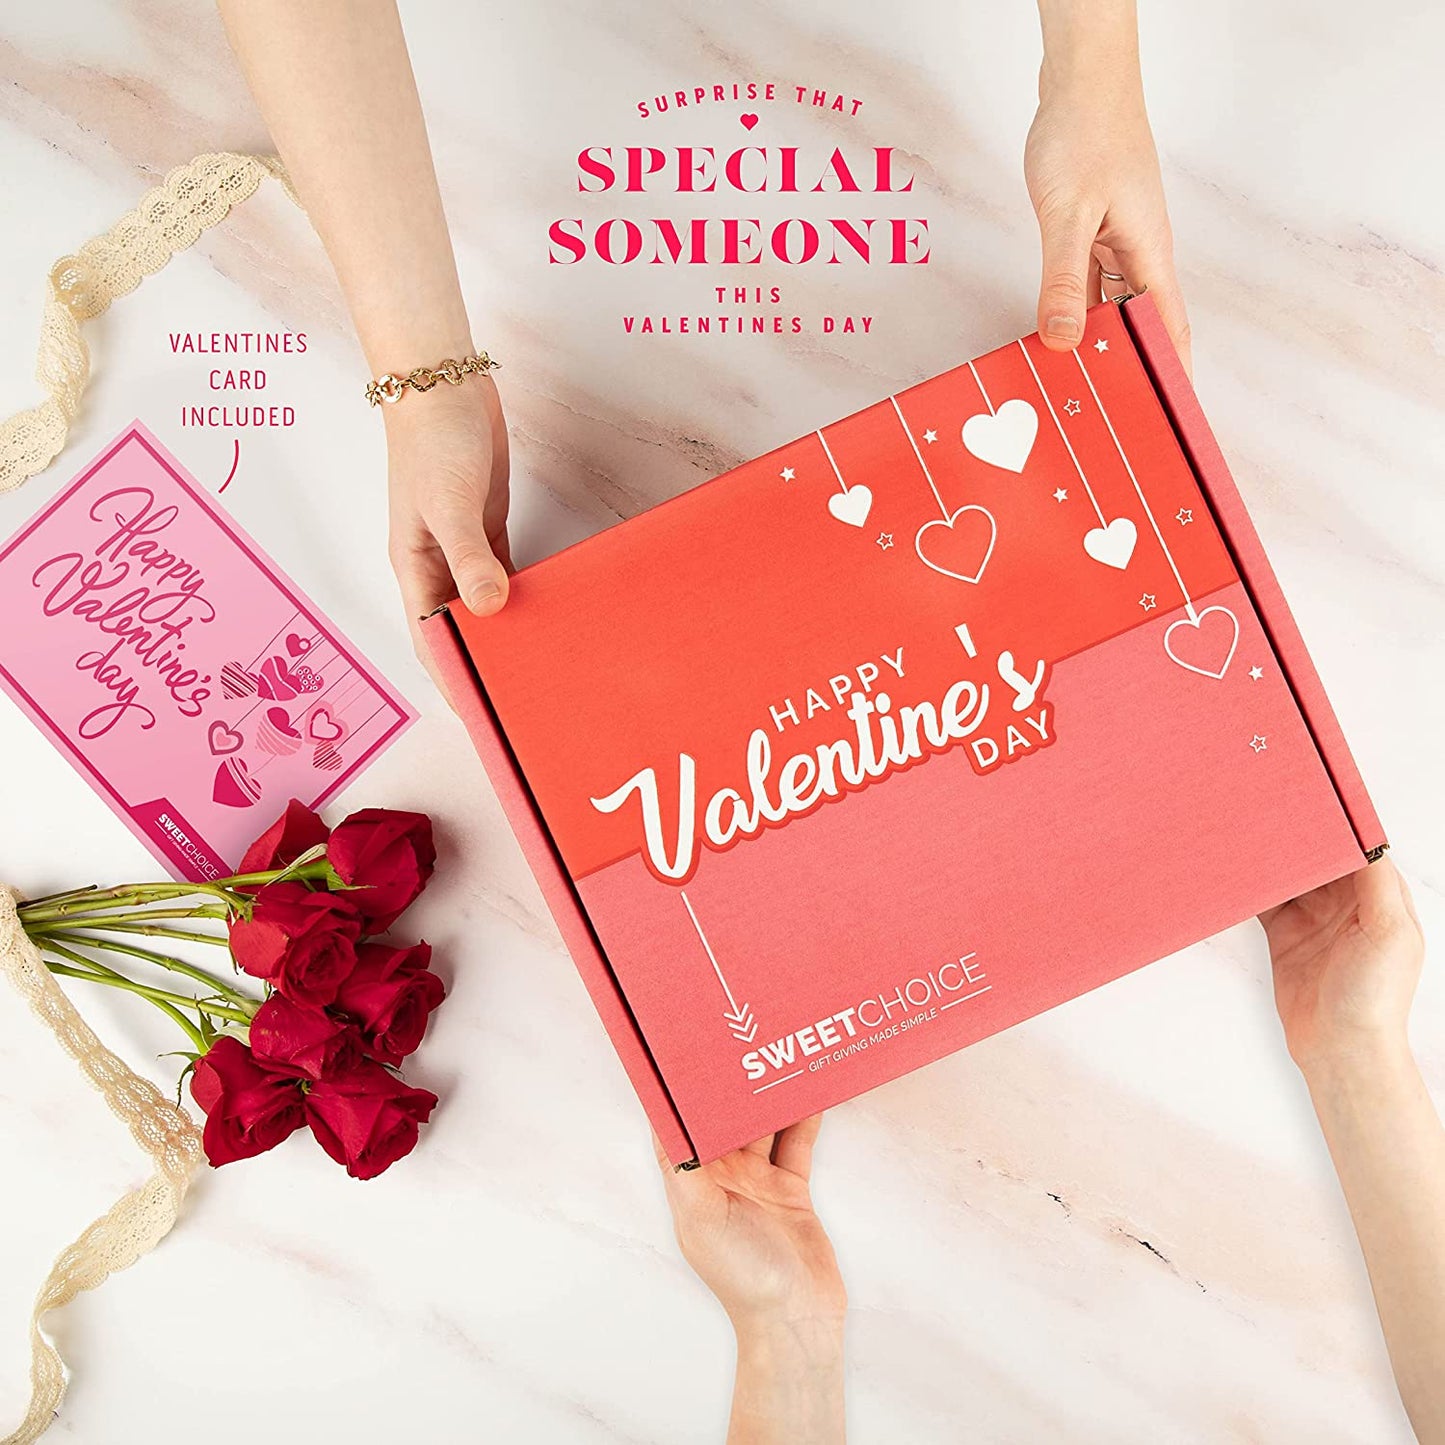 Valentine's Day /Pink/Red and white cookies Gift Box Assortment Variety Bundle Crate Present for Boy Girl Friend Student College Child Husband Wife Boyfriend Girlfriend Love Niece